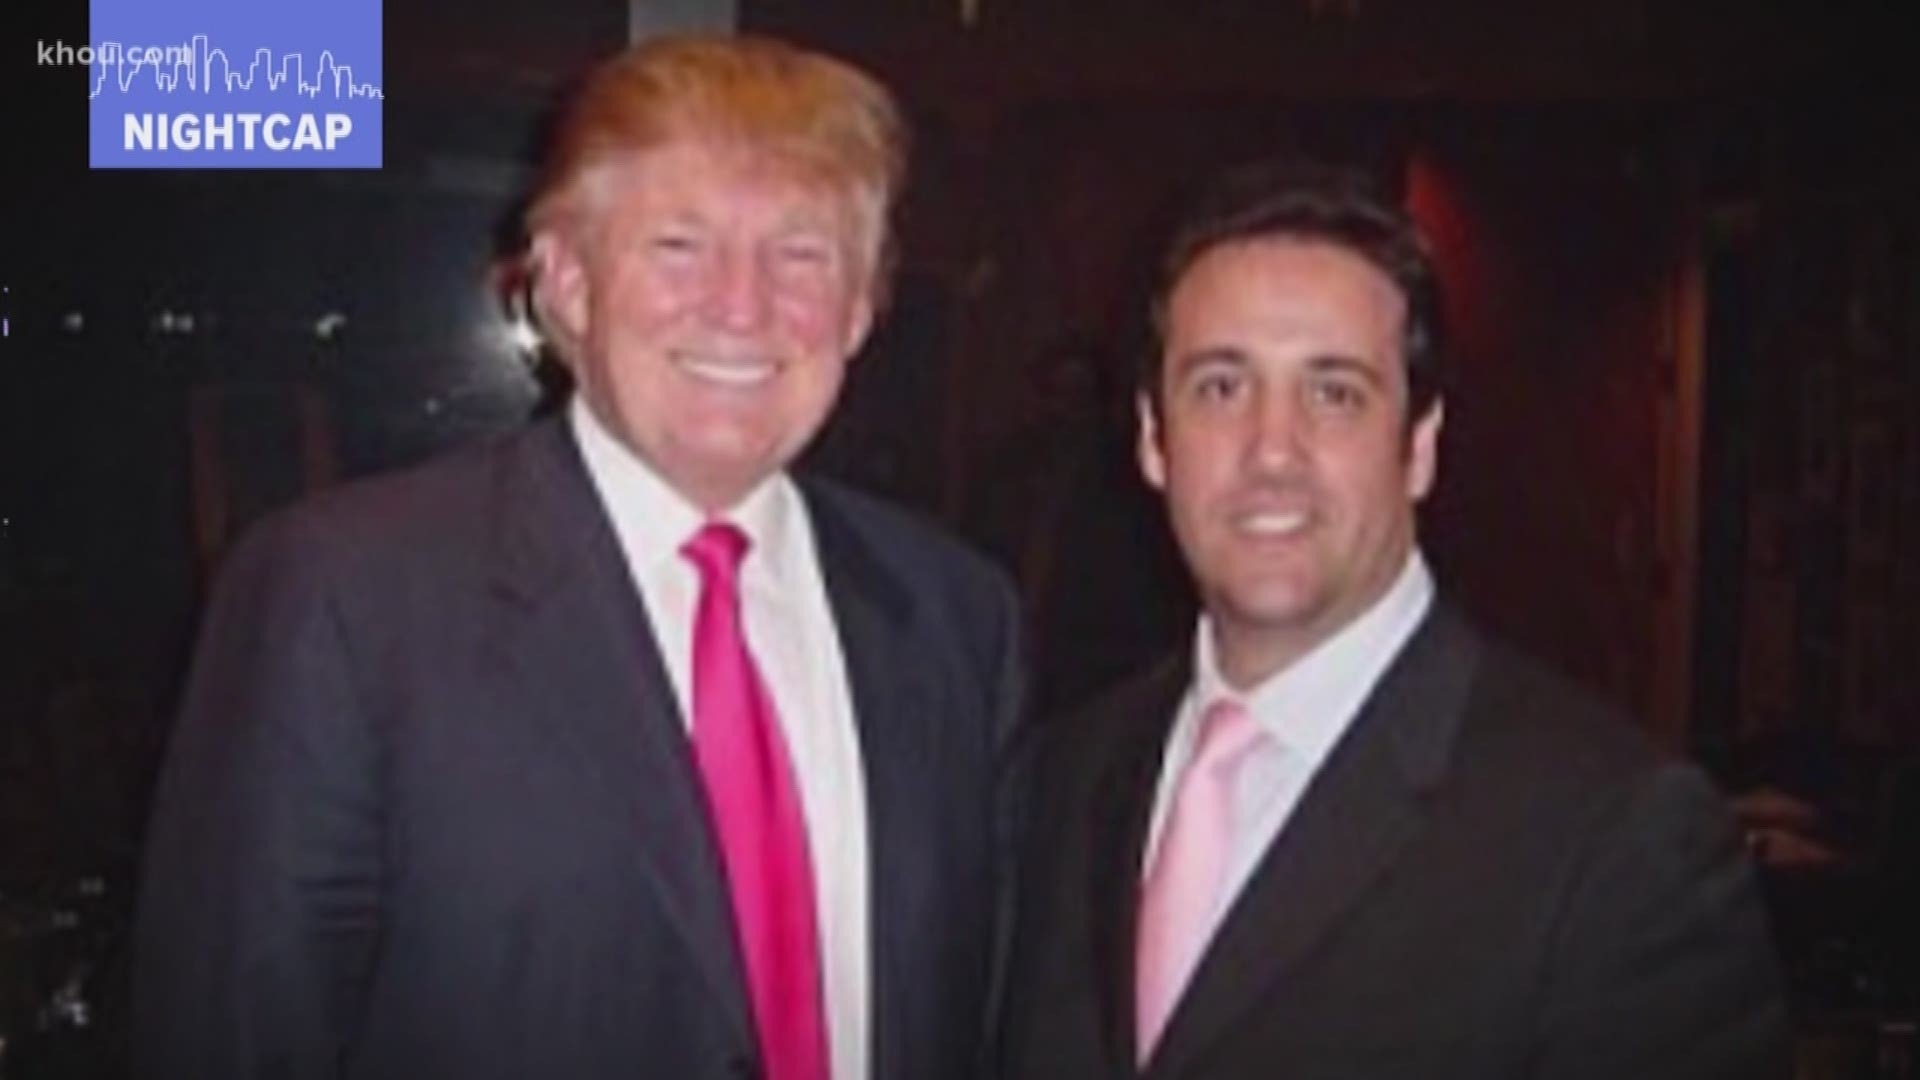 Prison-bound former Trump attorney Michael Cohen is clapping back about whether Trump knew about hush payments, plus more top stories on KHOU 11 News for Dec. 14, 2018.